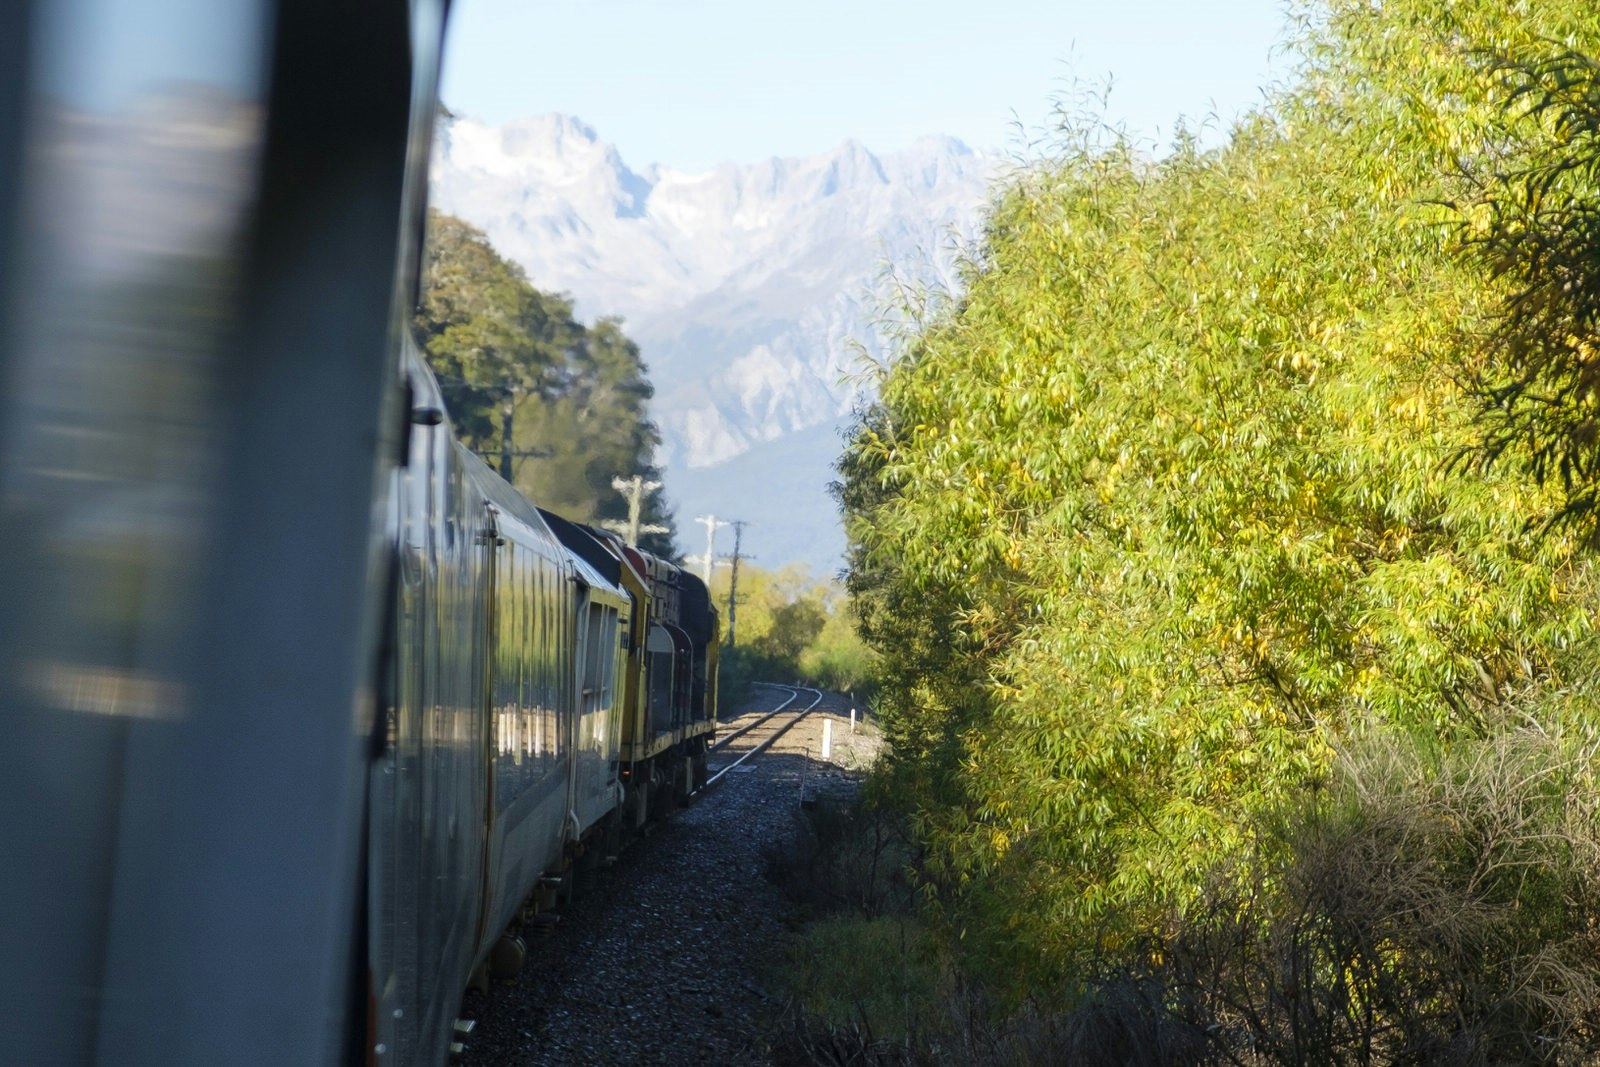 TranzAlpine train cutting through Arthur's Pass in New Zealand on a sunny day. There are green trees to the left of the train and snowy mountains in the far distance